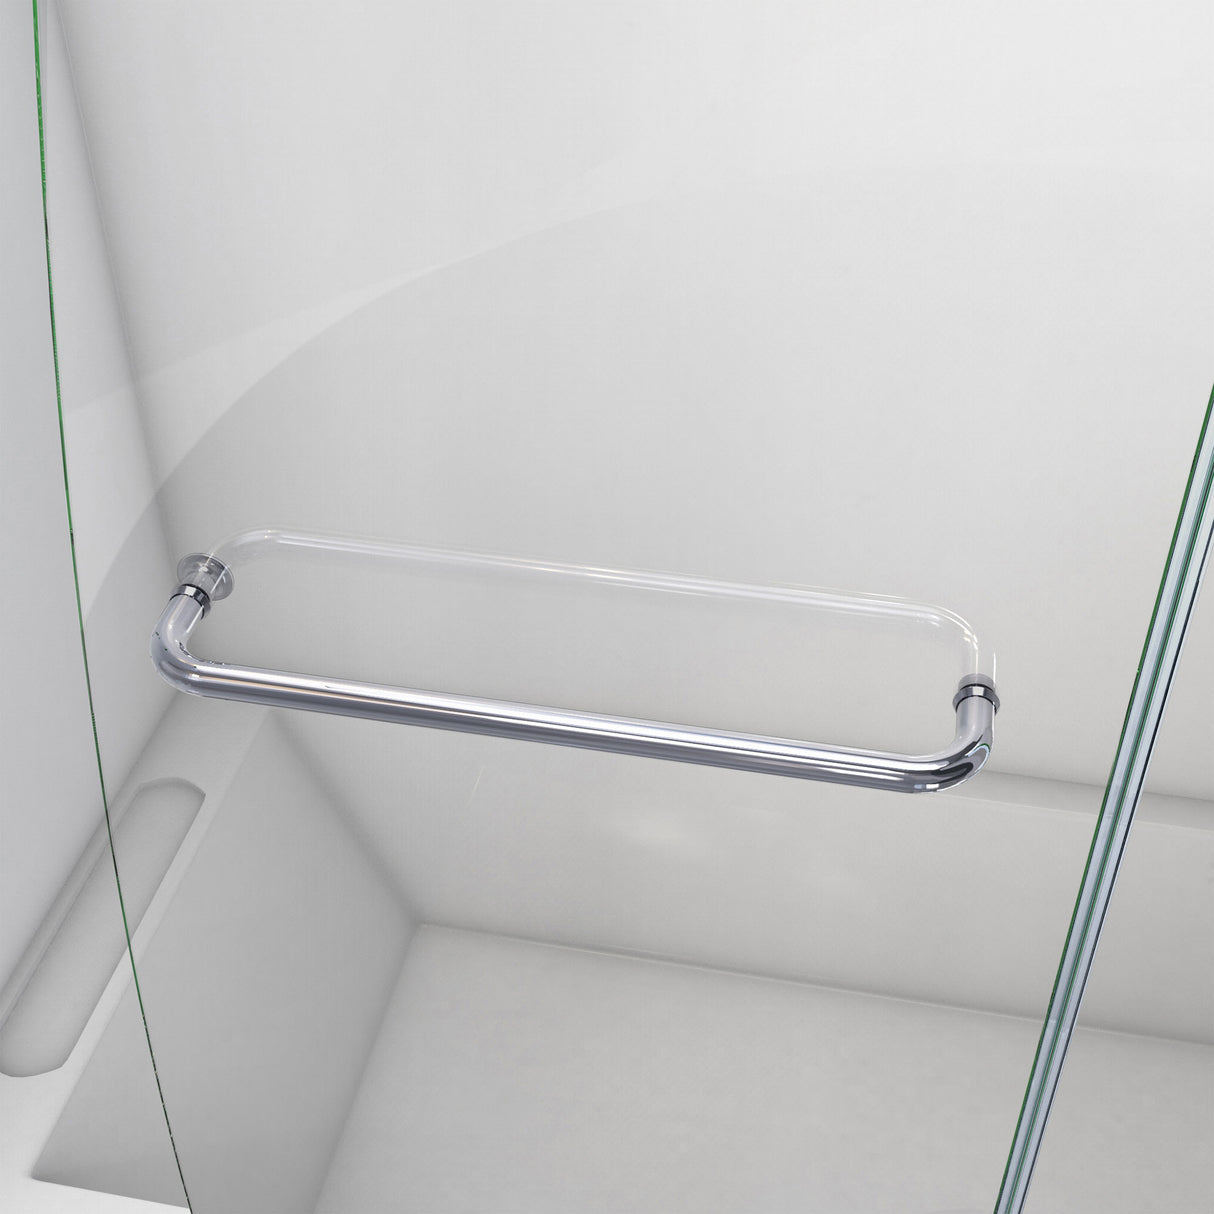 DreamLine Aqua 56-60 in. W x 58 in. H Frameless Hinged Tub Door with Extender Panel in Chrome